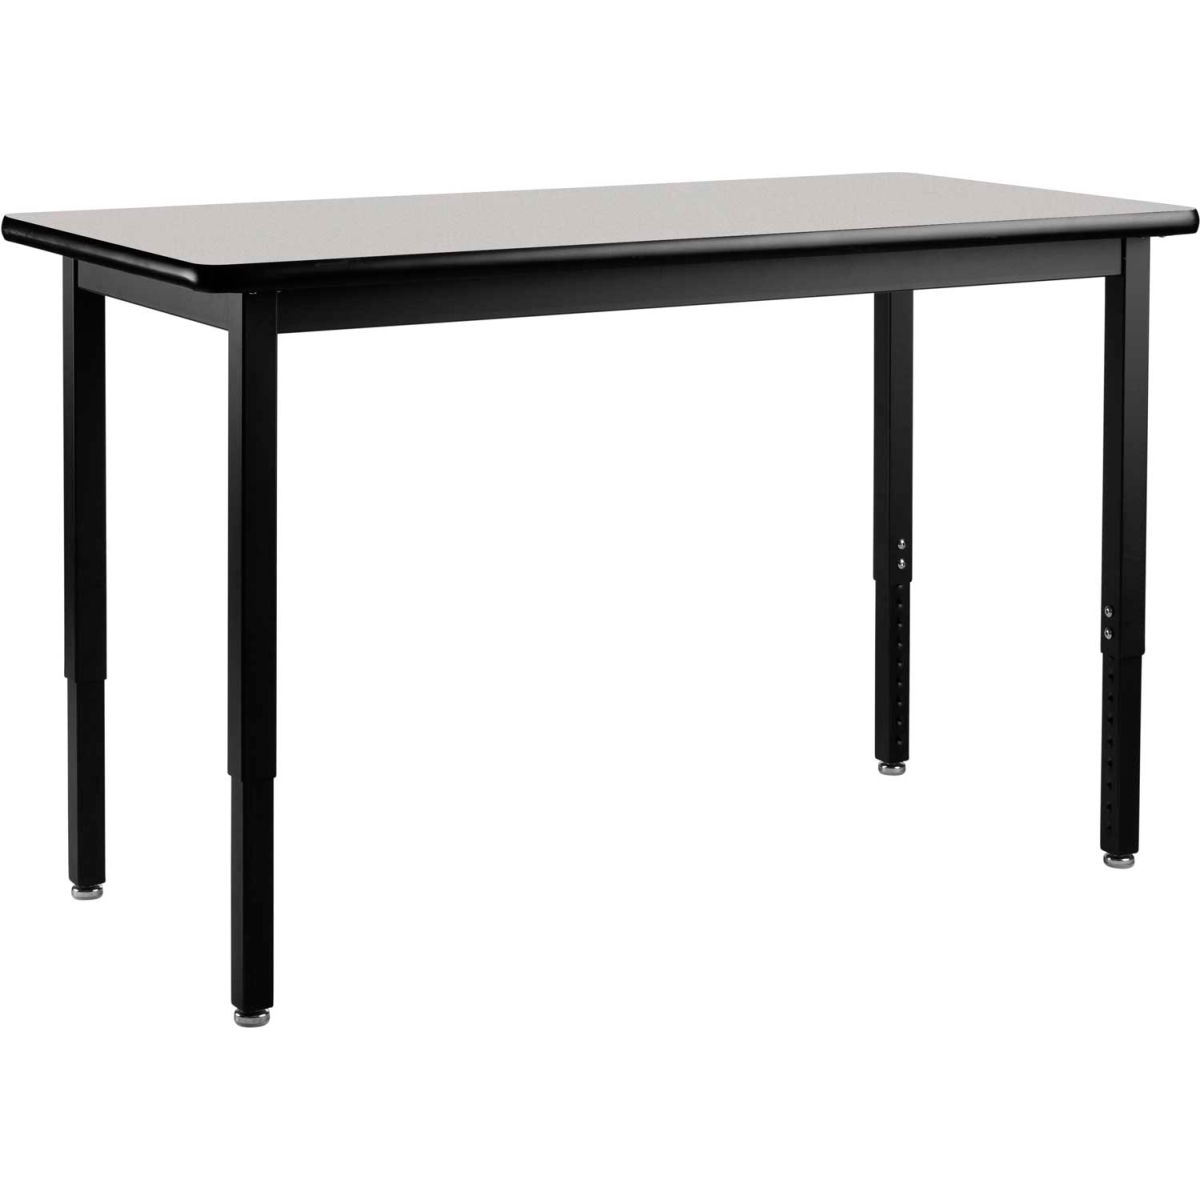 Picture of National Public Seating 695748GY Interion Utility Table - Gray Nebula - 60 x 24 in.